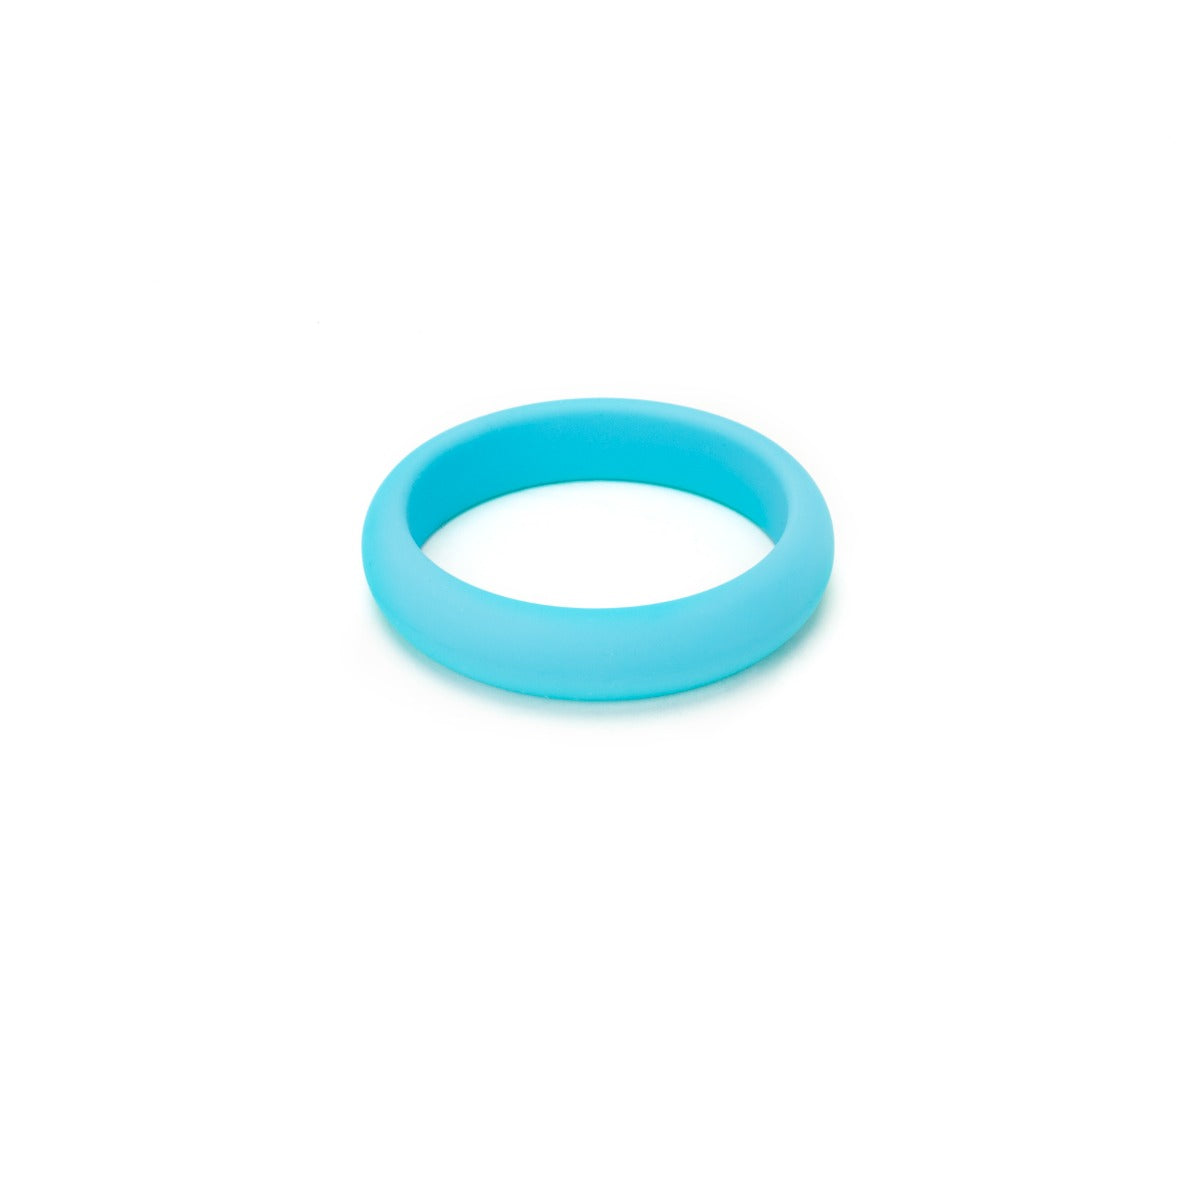 a blue ring on a white background